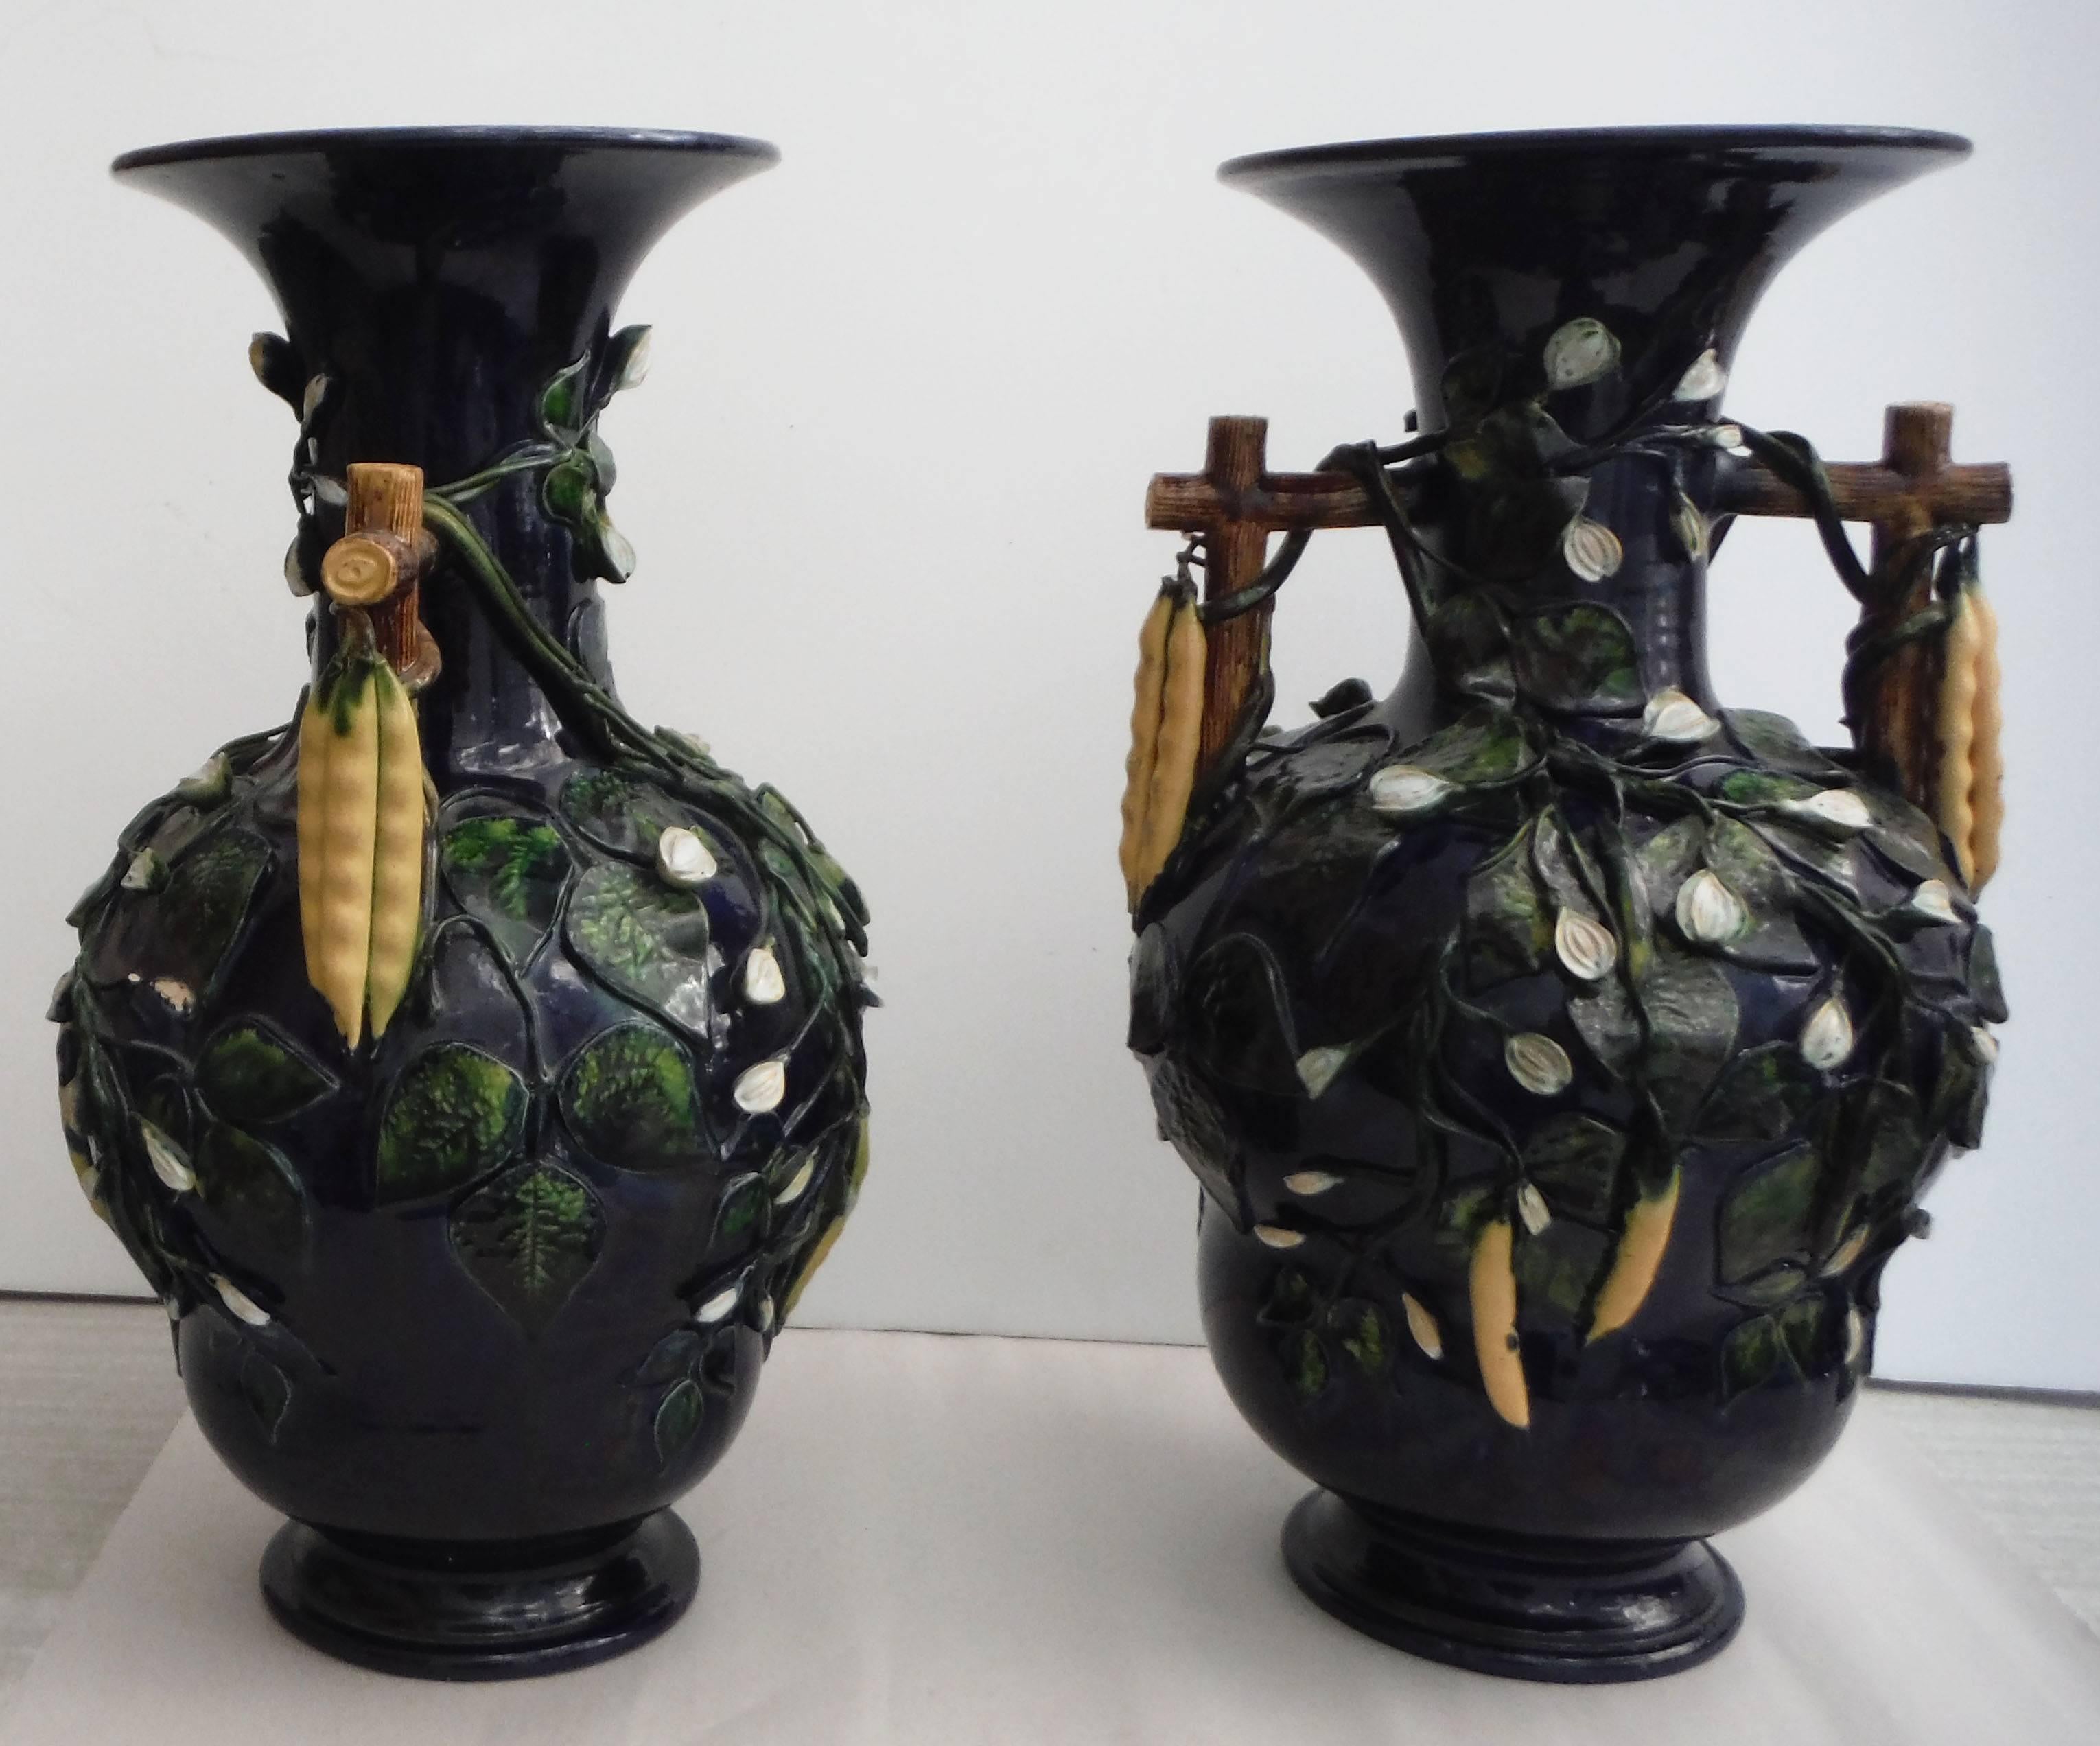 Remarkable oversize pair of Majolica vases decorated with beans in high relief attributed to Saint Honore, circa 1880.
On a deep navy blue, the handled Trompe l'oeil vases are decorated on all the sides with beans and white flowers.